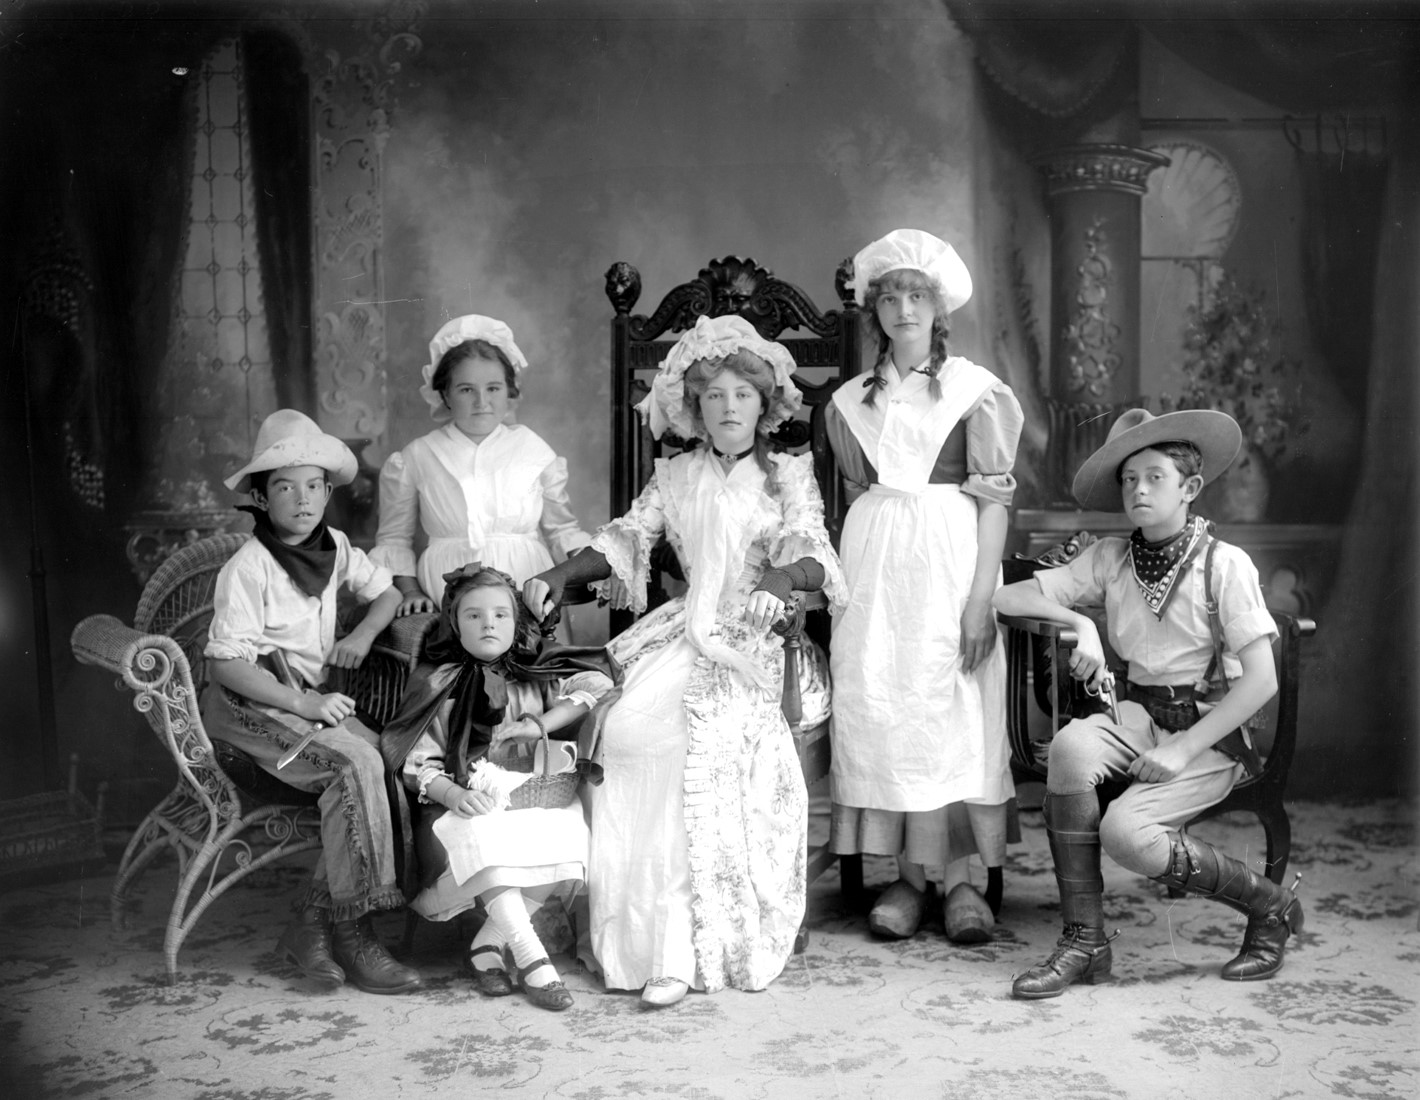 Six children in costumes posing proudly in a photographer’s studio.